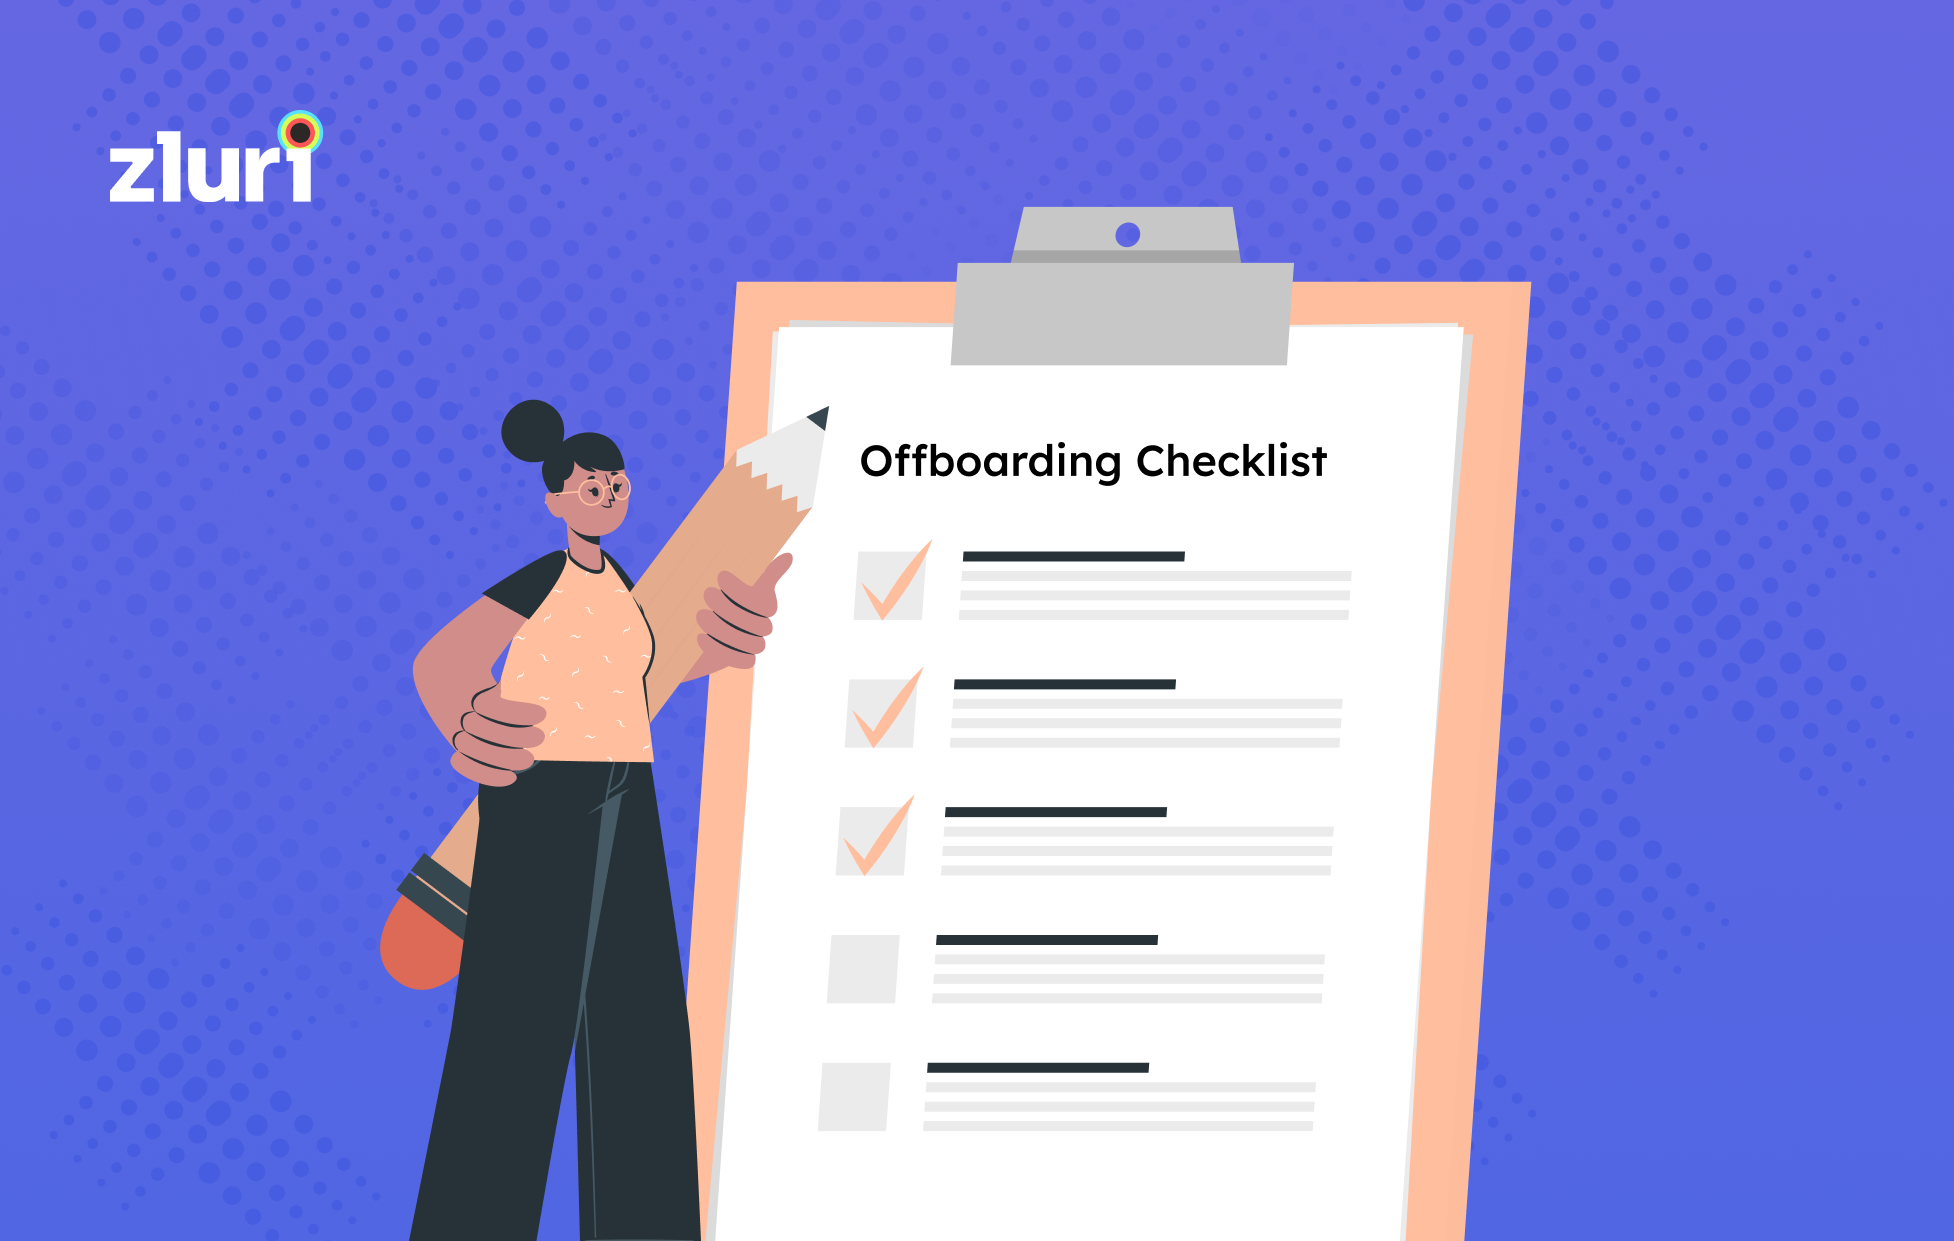 7 Security Guidelines for an IT Offboarding Checklist